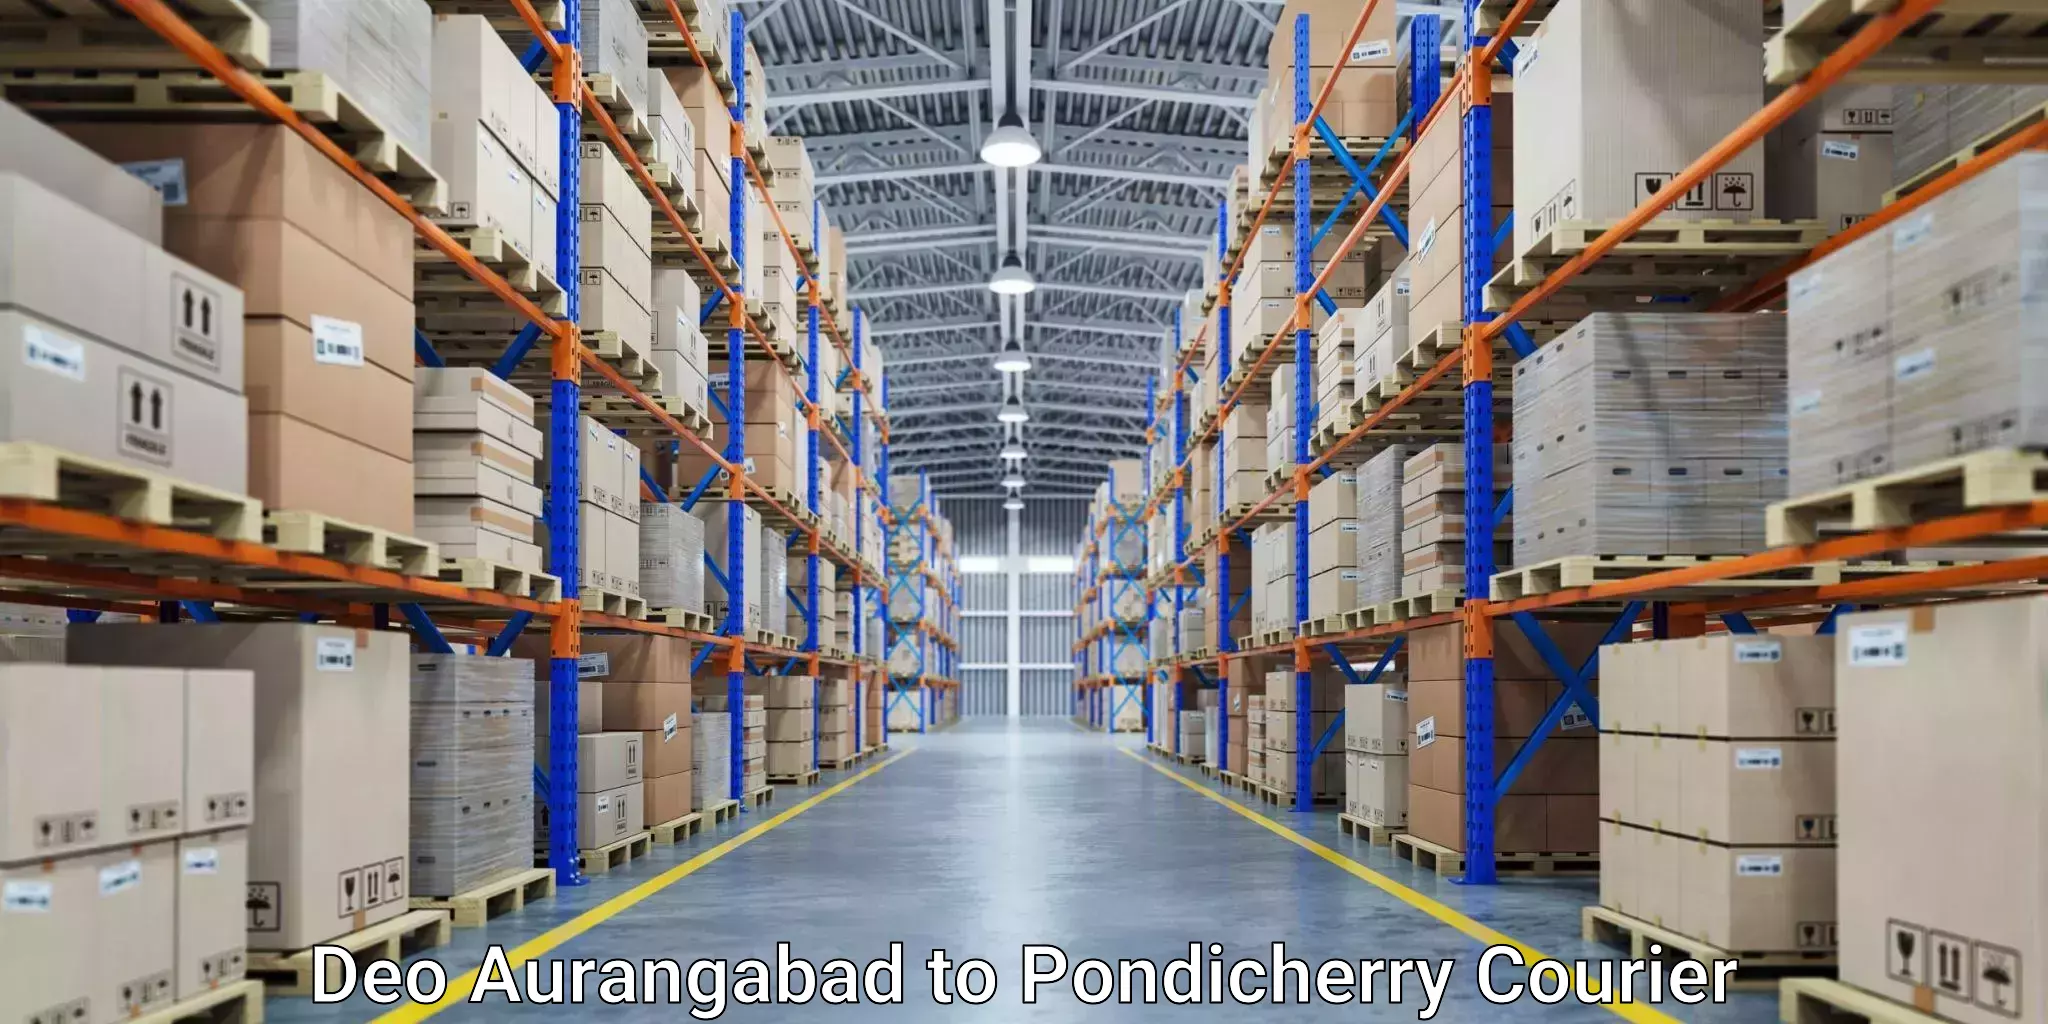 Global courier networks Deo Aurangabad to Pondicherry